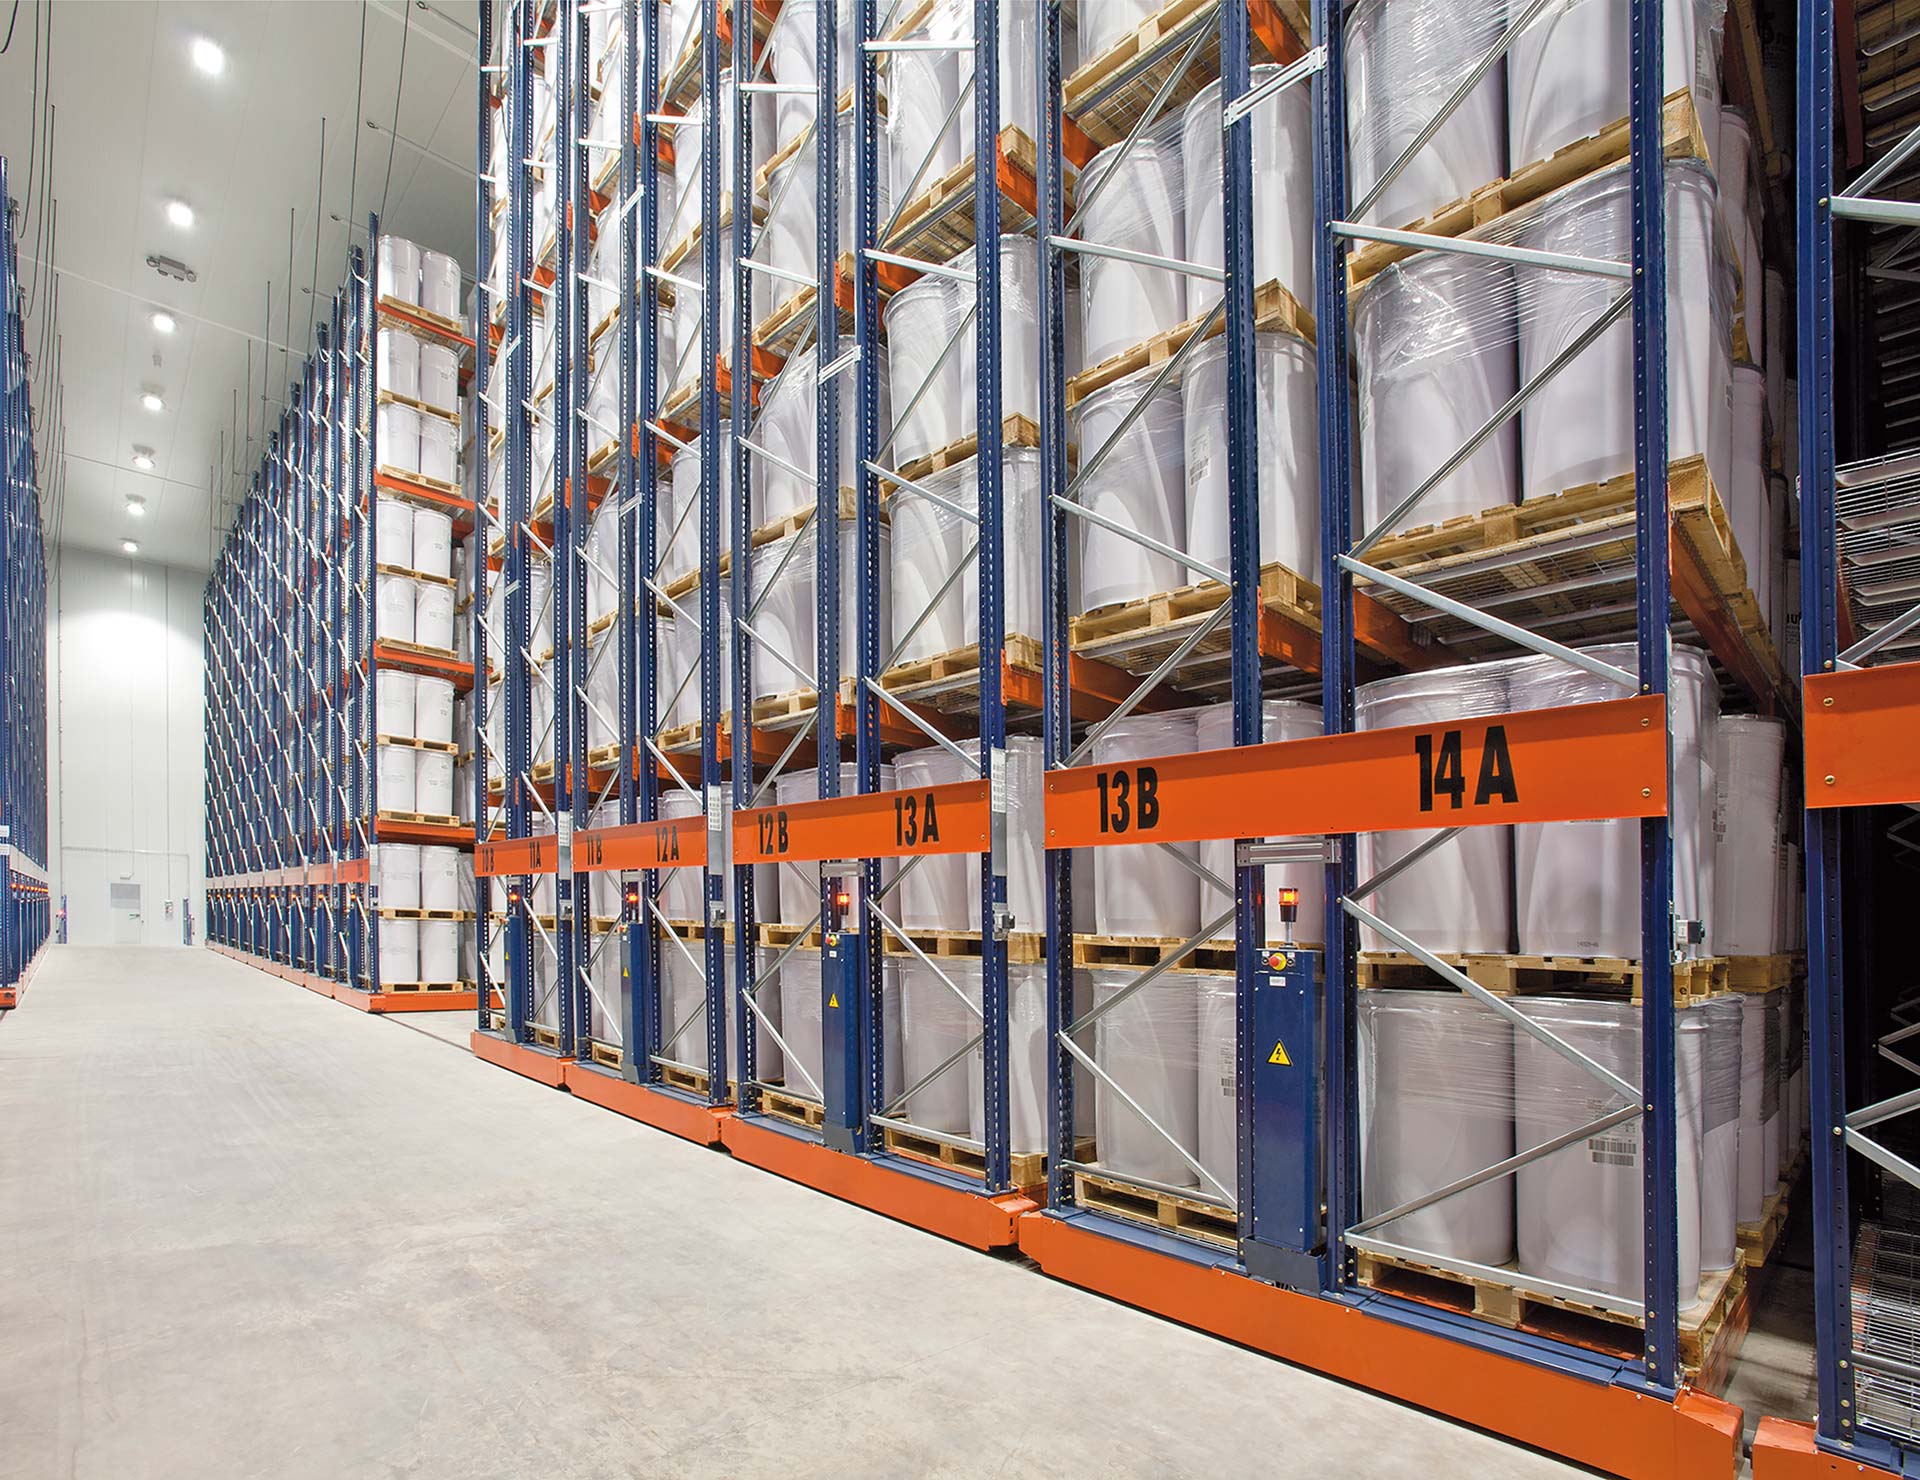 Movirack mobile racking boosts storage capacity by 80 to 120%